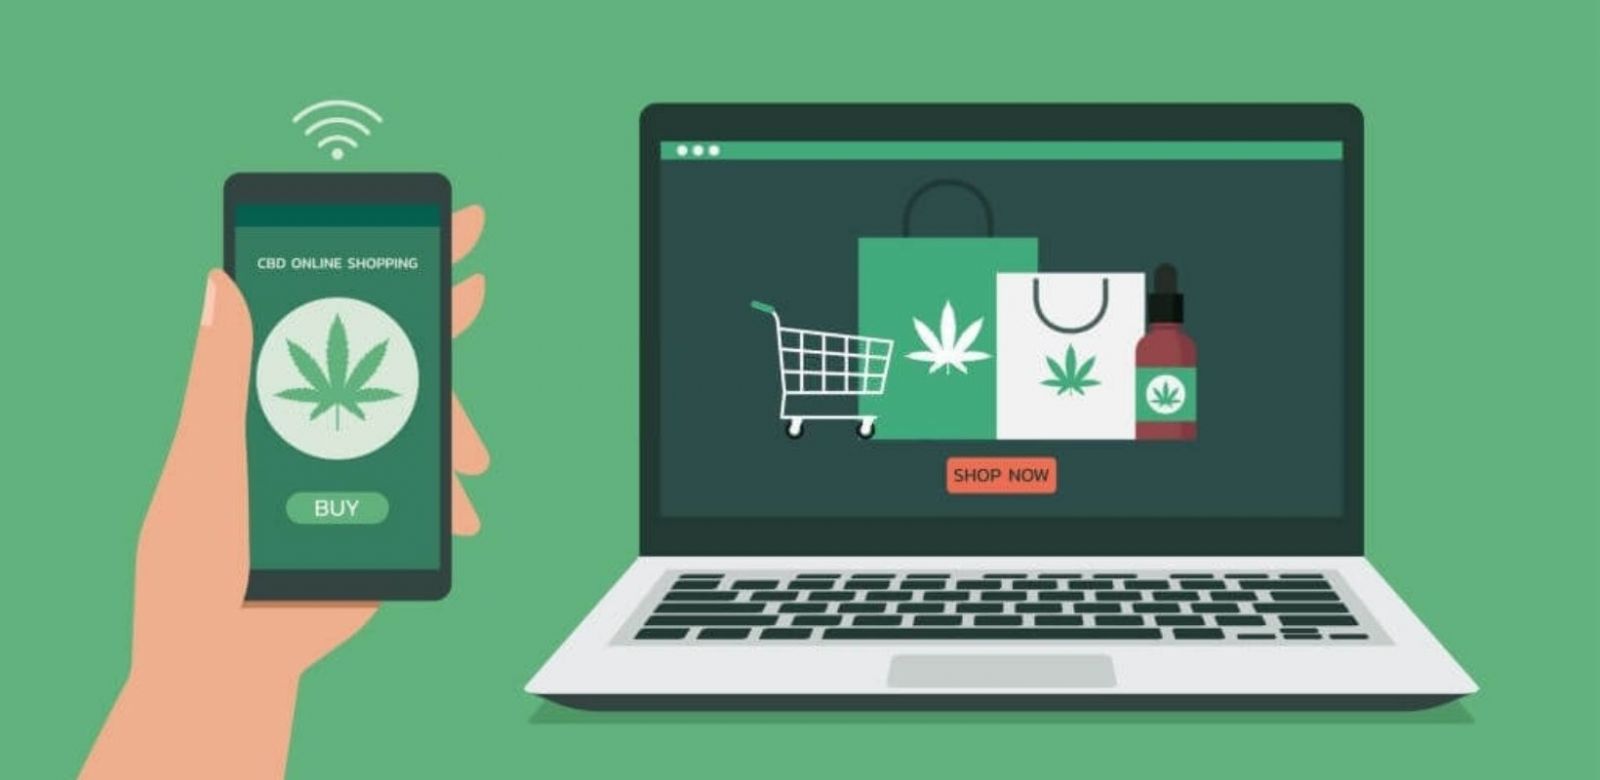 Photo for: Online Retailing Driving the Cannabis-Infused Drinks Sales